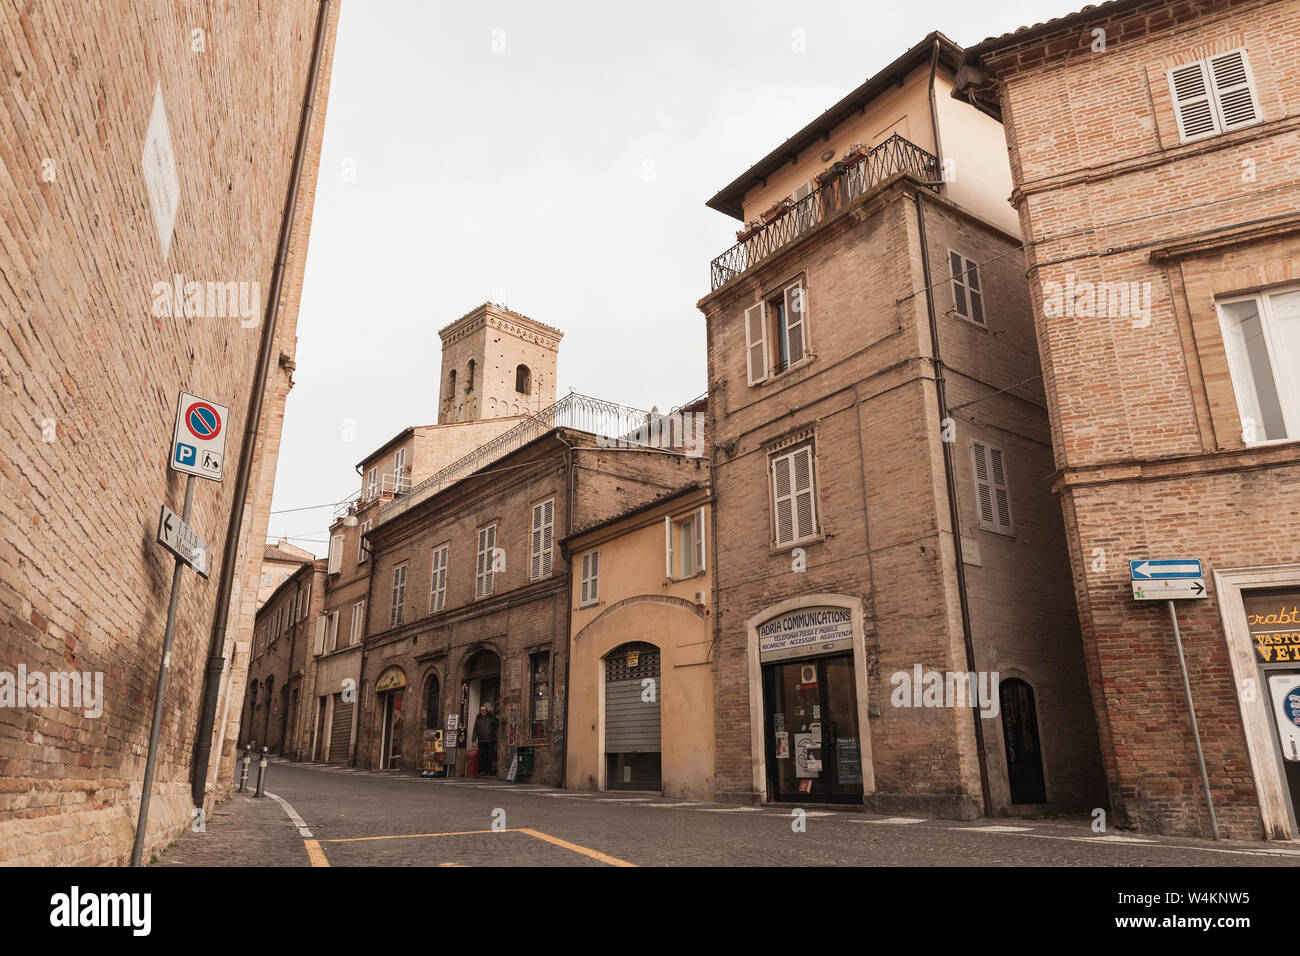 Fermo, Italy - February 11, 2016: Street view with living houses of Fermo, Italian old town Stock Photo